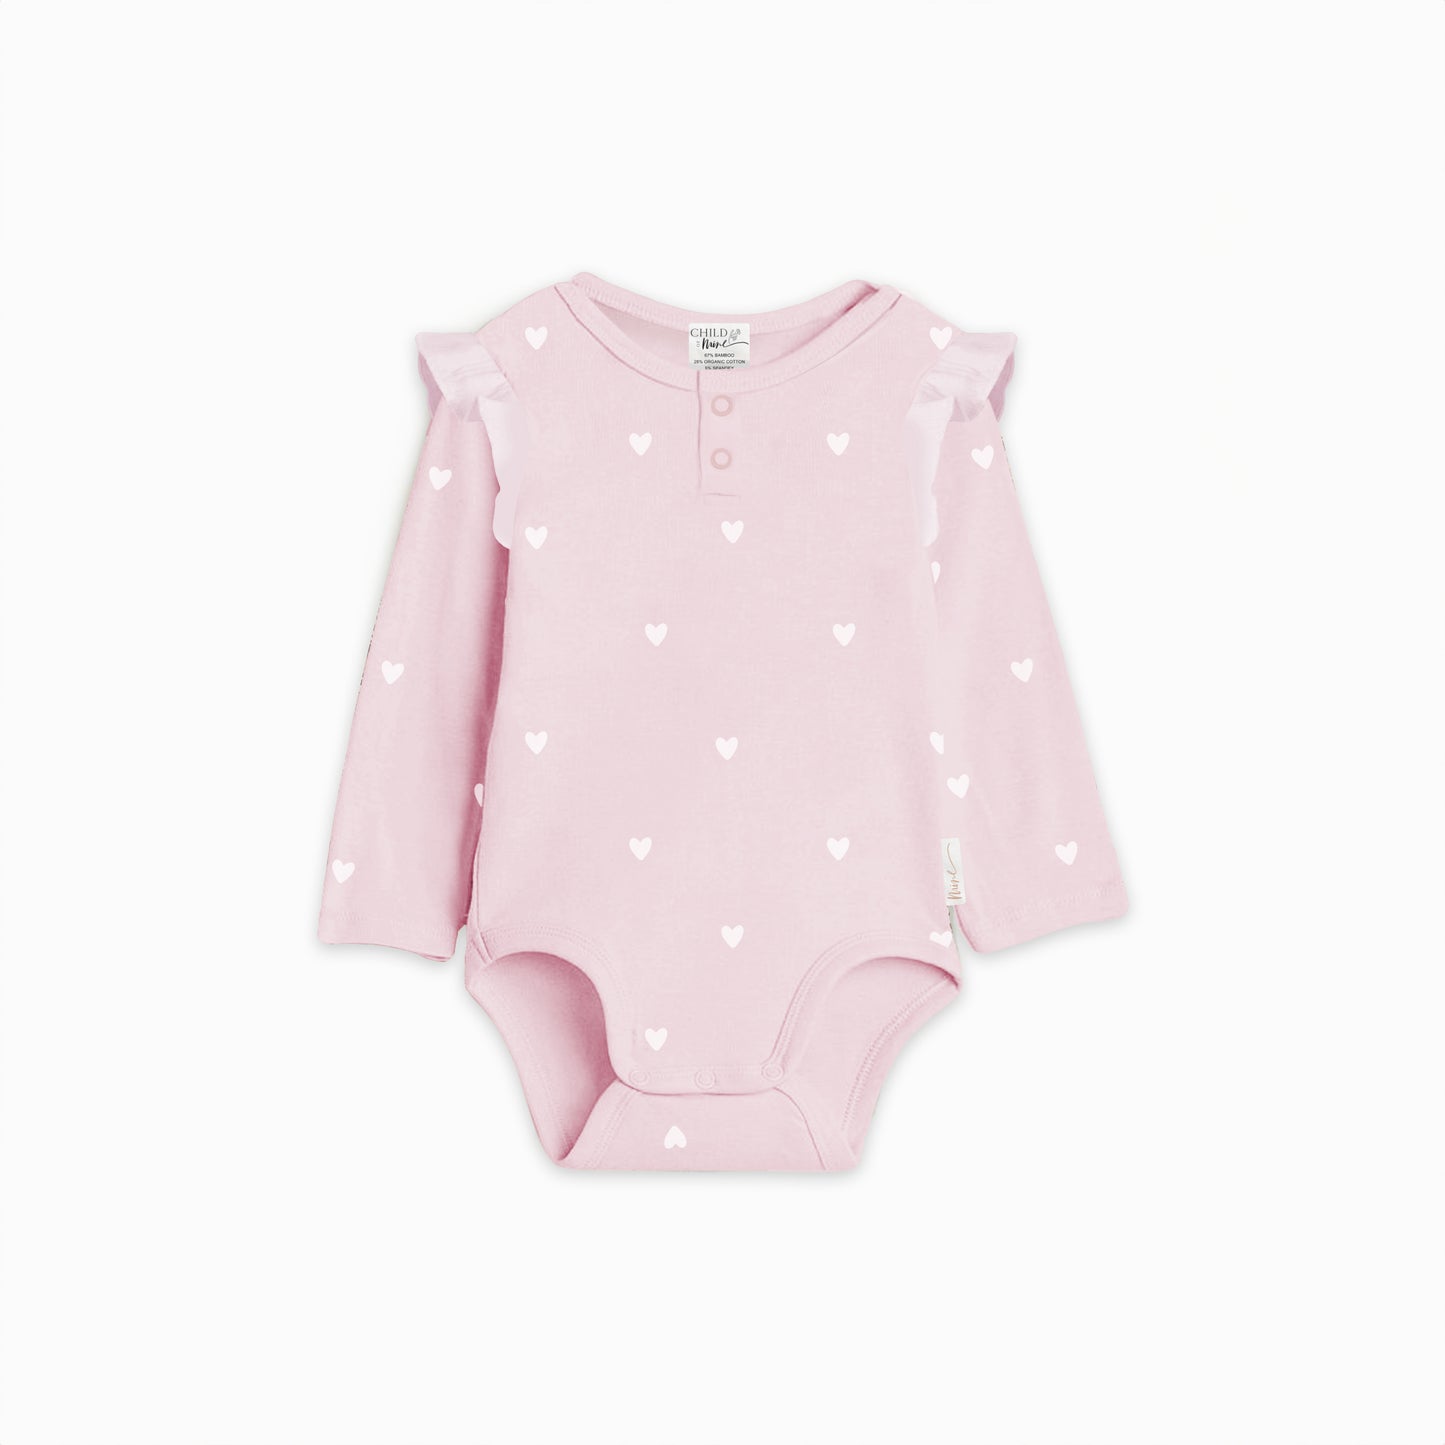 Frilly Bodysuit - Pink Hearts